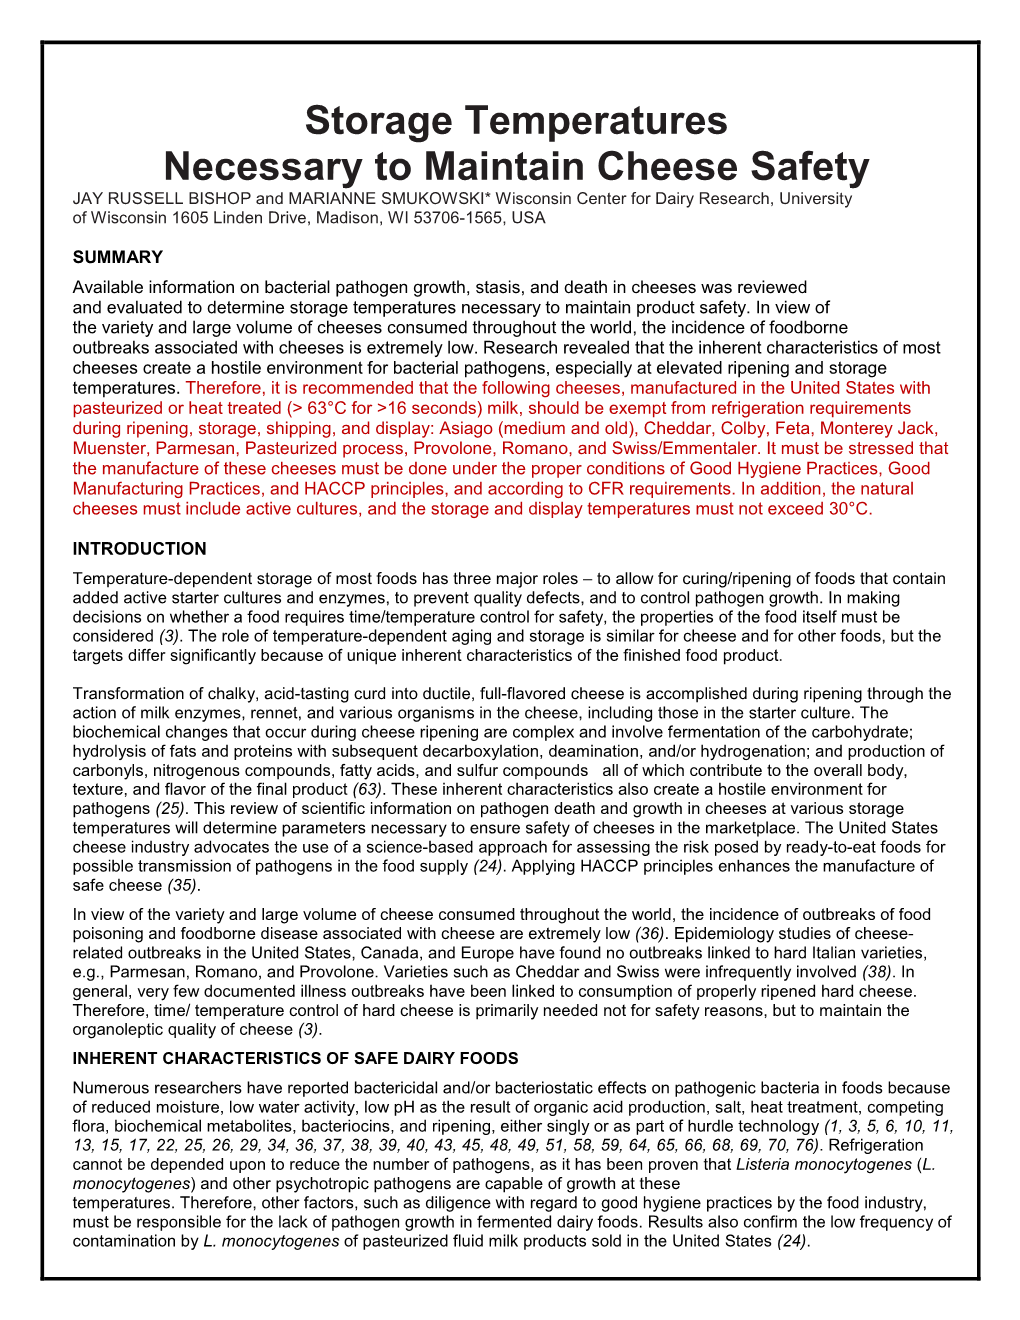 Storage Temperatures Necessary to Maintain Cheese Safety